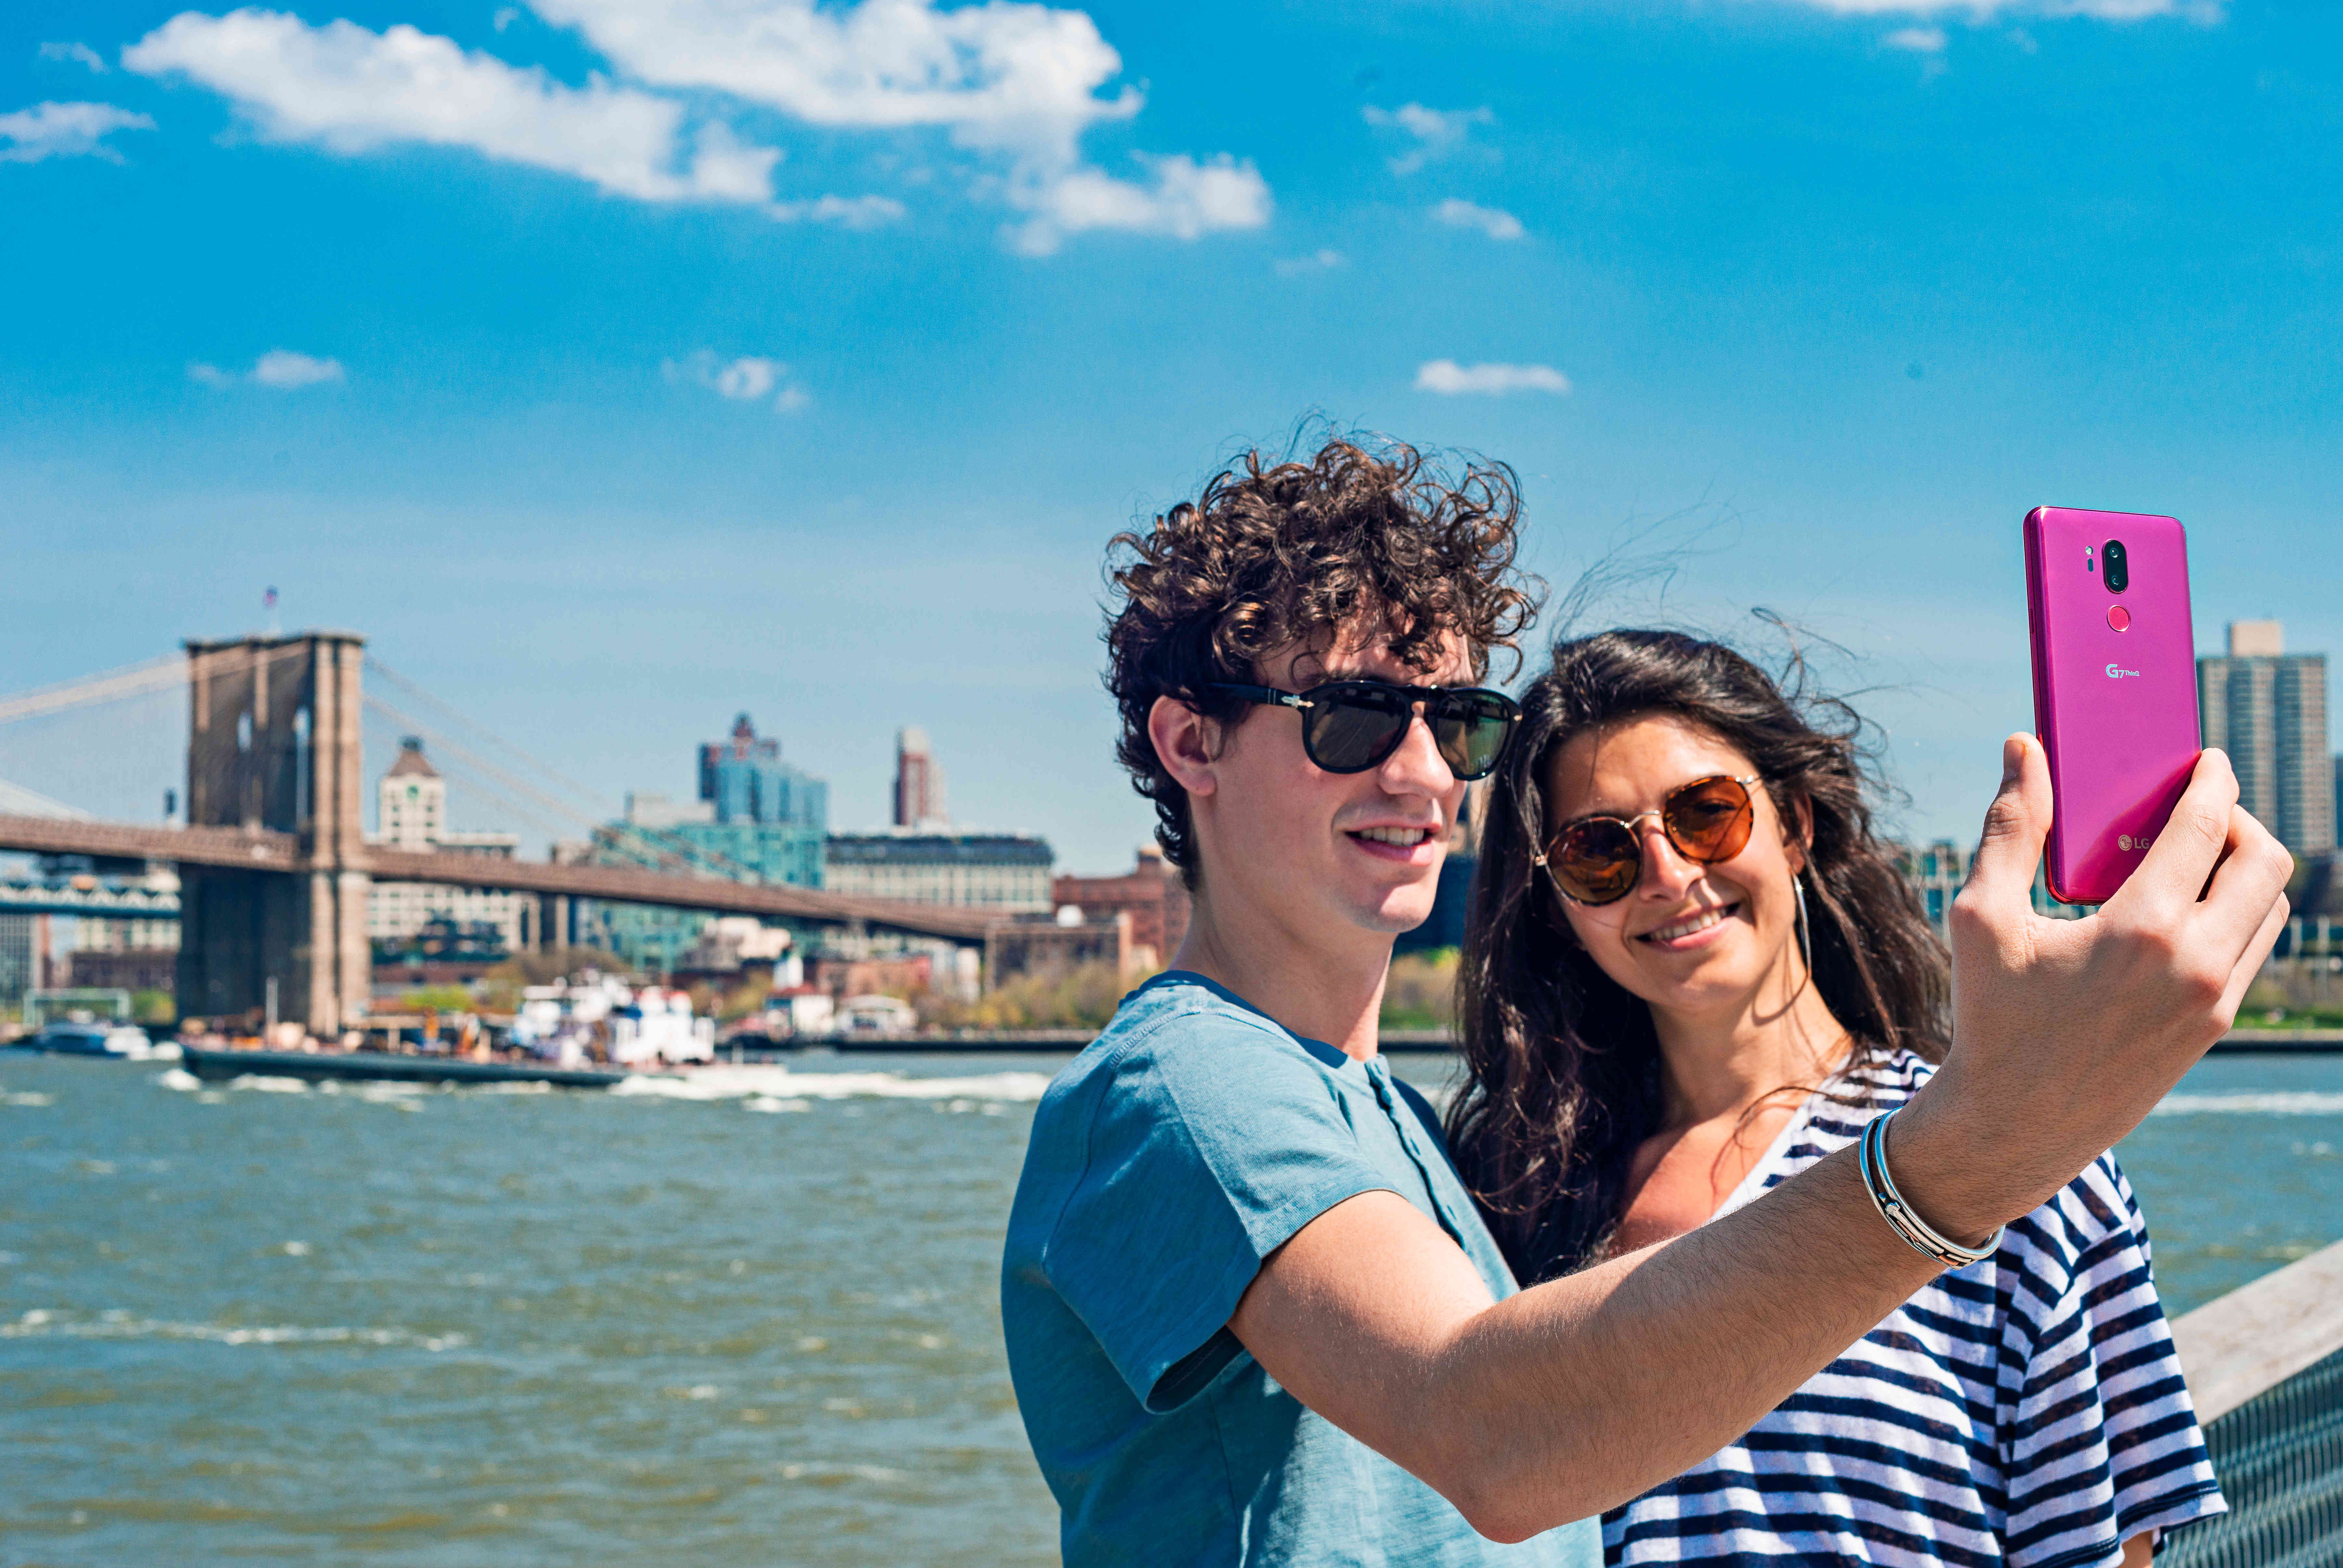 A man and woman taking a selfie in front of a riverfront with the LG G7 ThinQ in Raspberry Rose